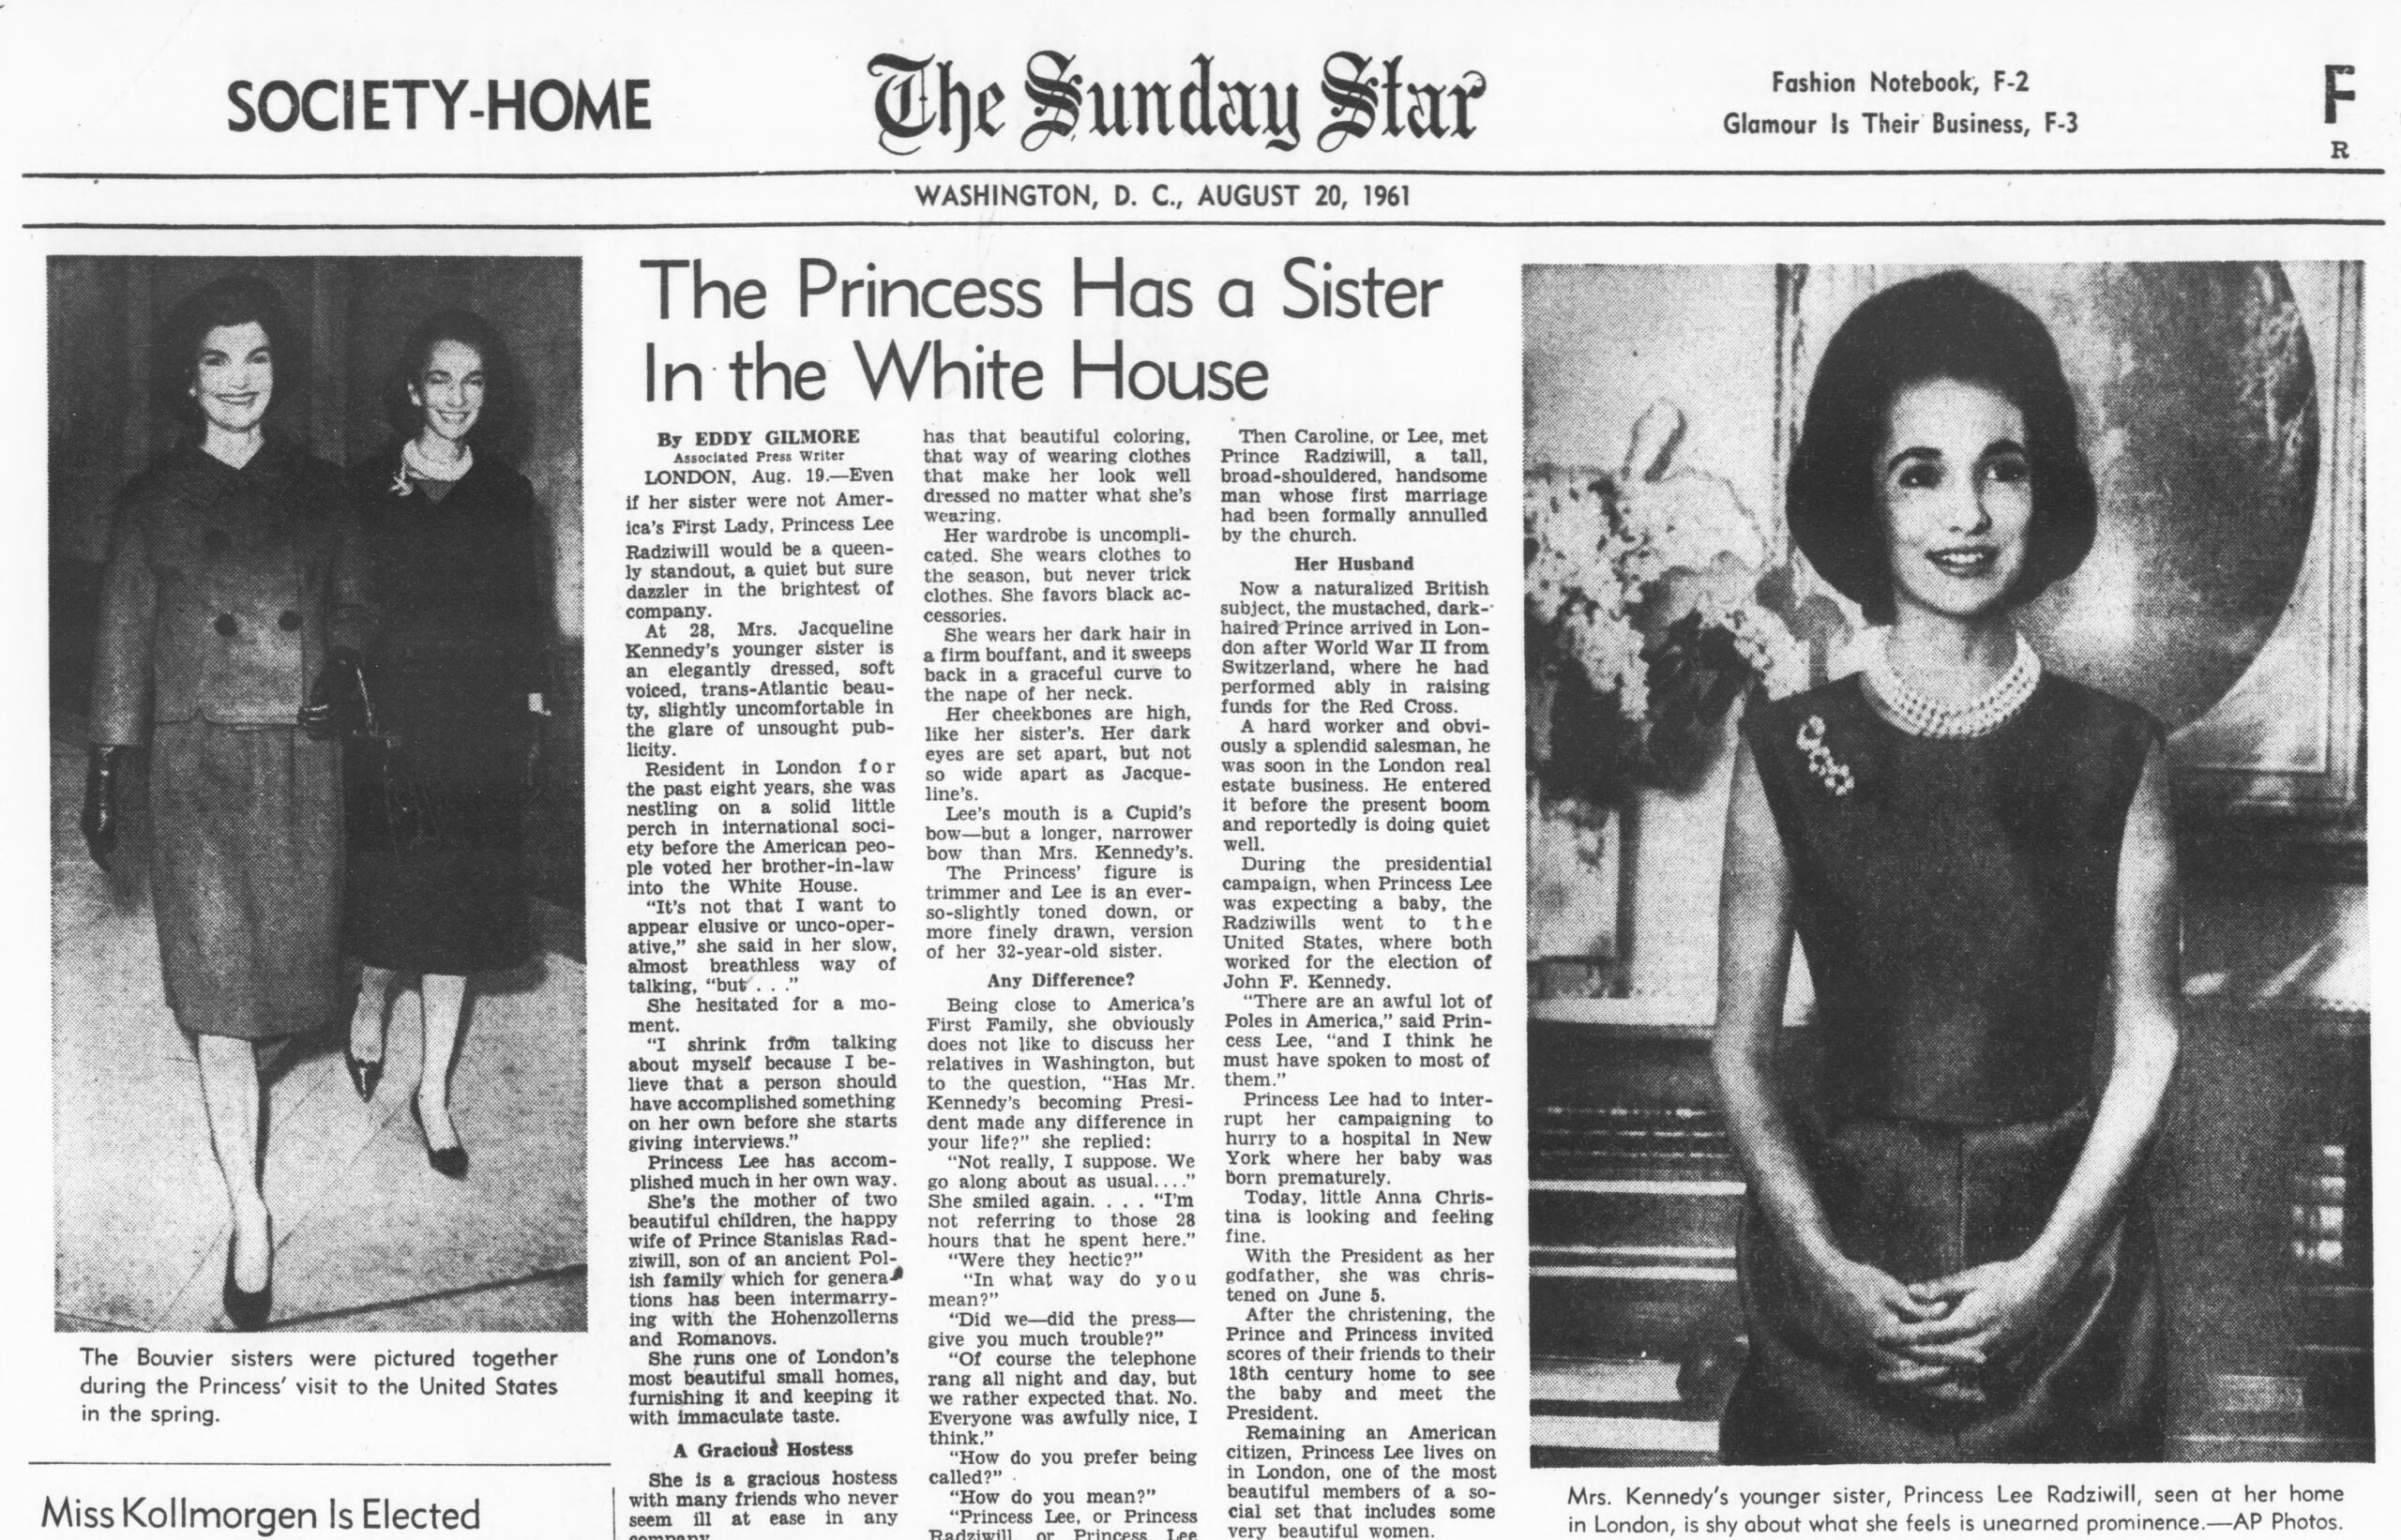 Top half of a cropped black, white and grey scale newspaper page from The Sunday Star. The article is centered and entitled The Princess Has a Sister in the White House. To the right of the article is a phogoraphs of Lee Radziwill wearing a sleeveless dress and several strings of pearls with her hands clasped in front of her. To the left of the article text is a picture of the Bouvier sisters with Lee walking just behind Jackie Kennedy as they both smile. 